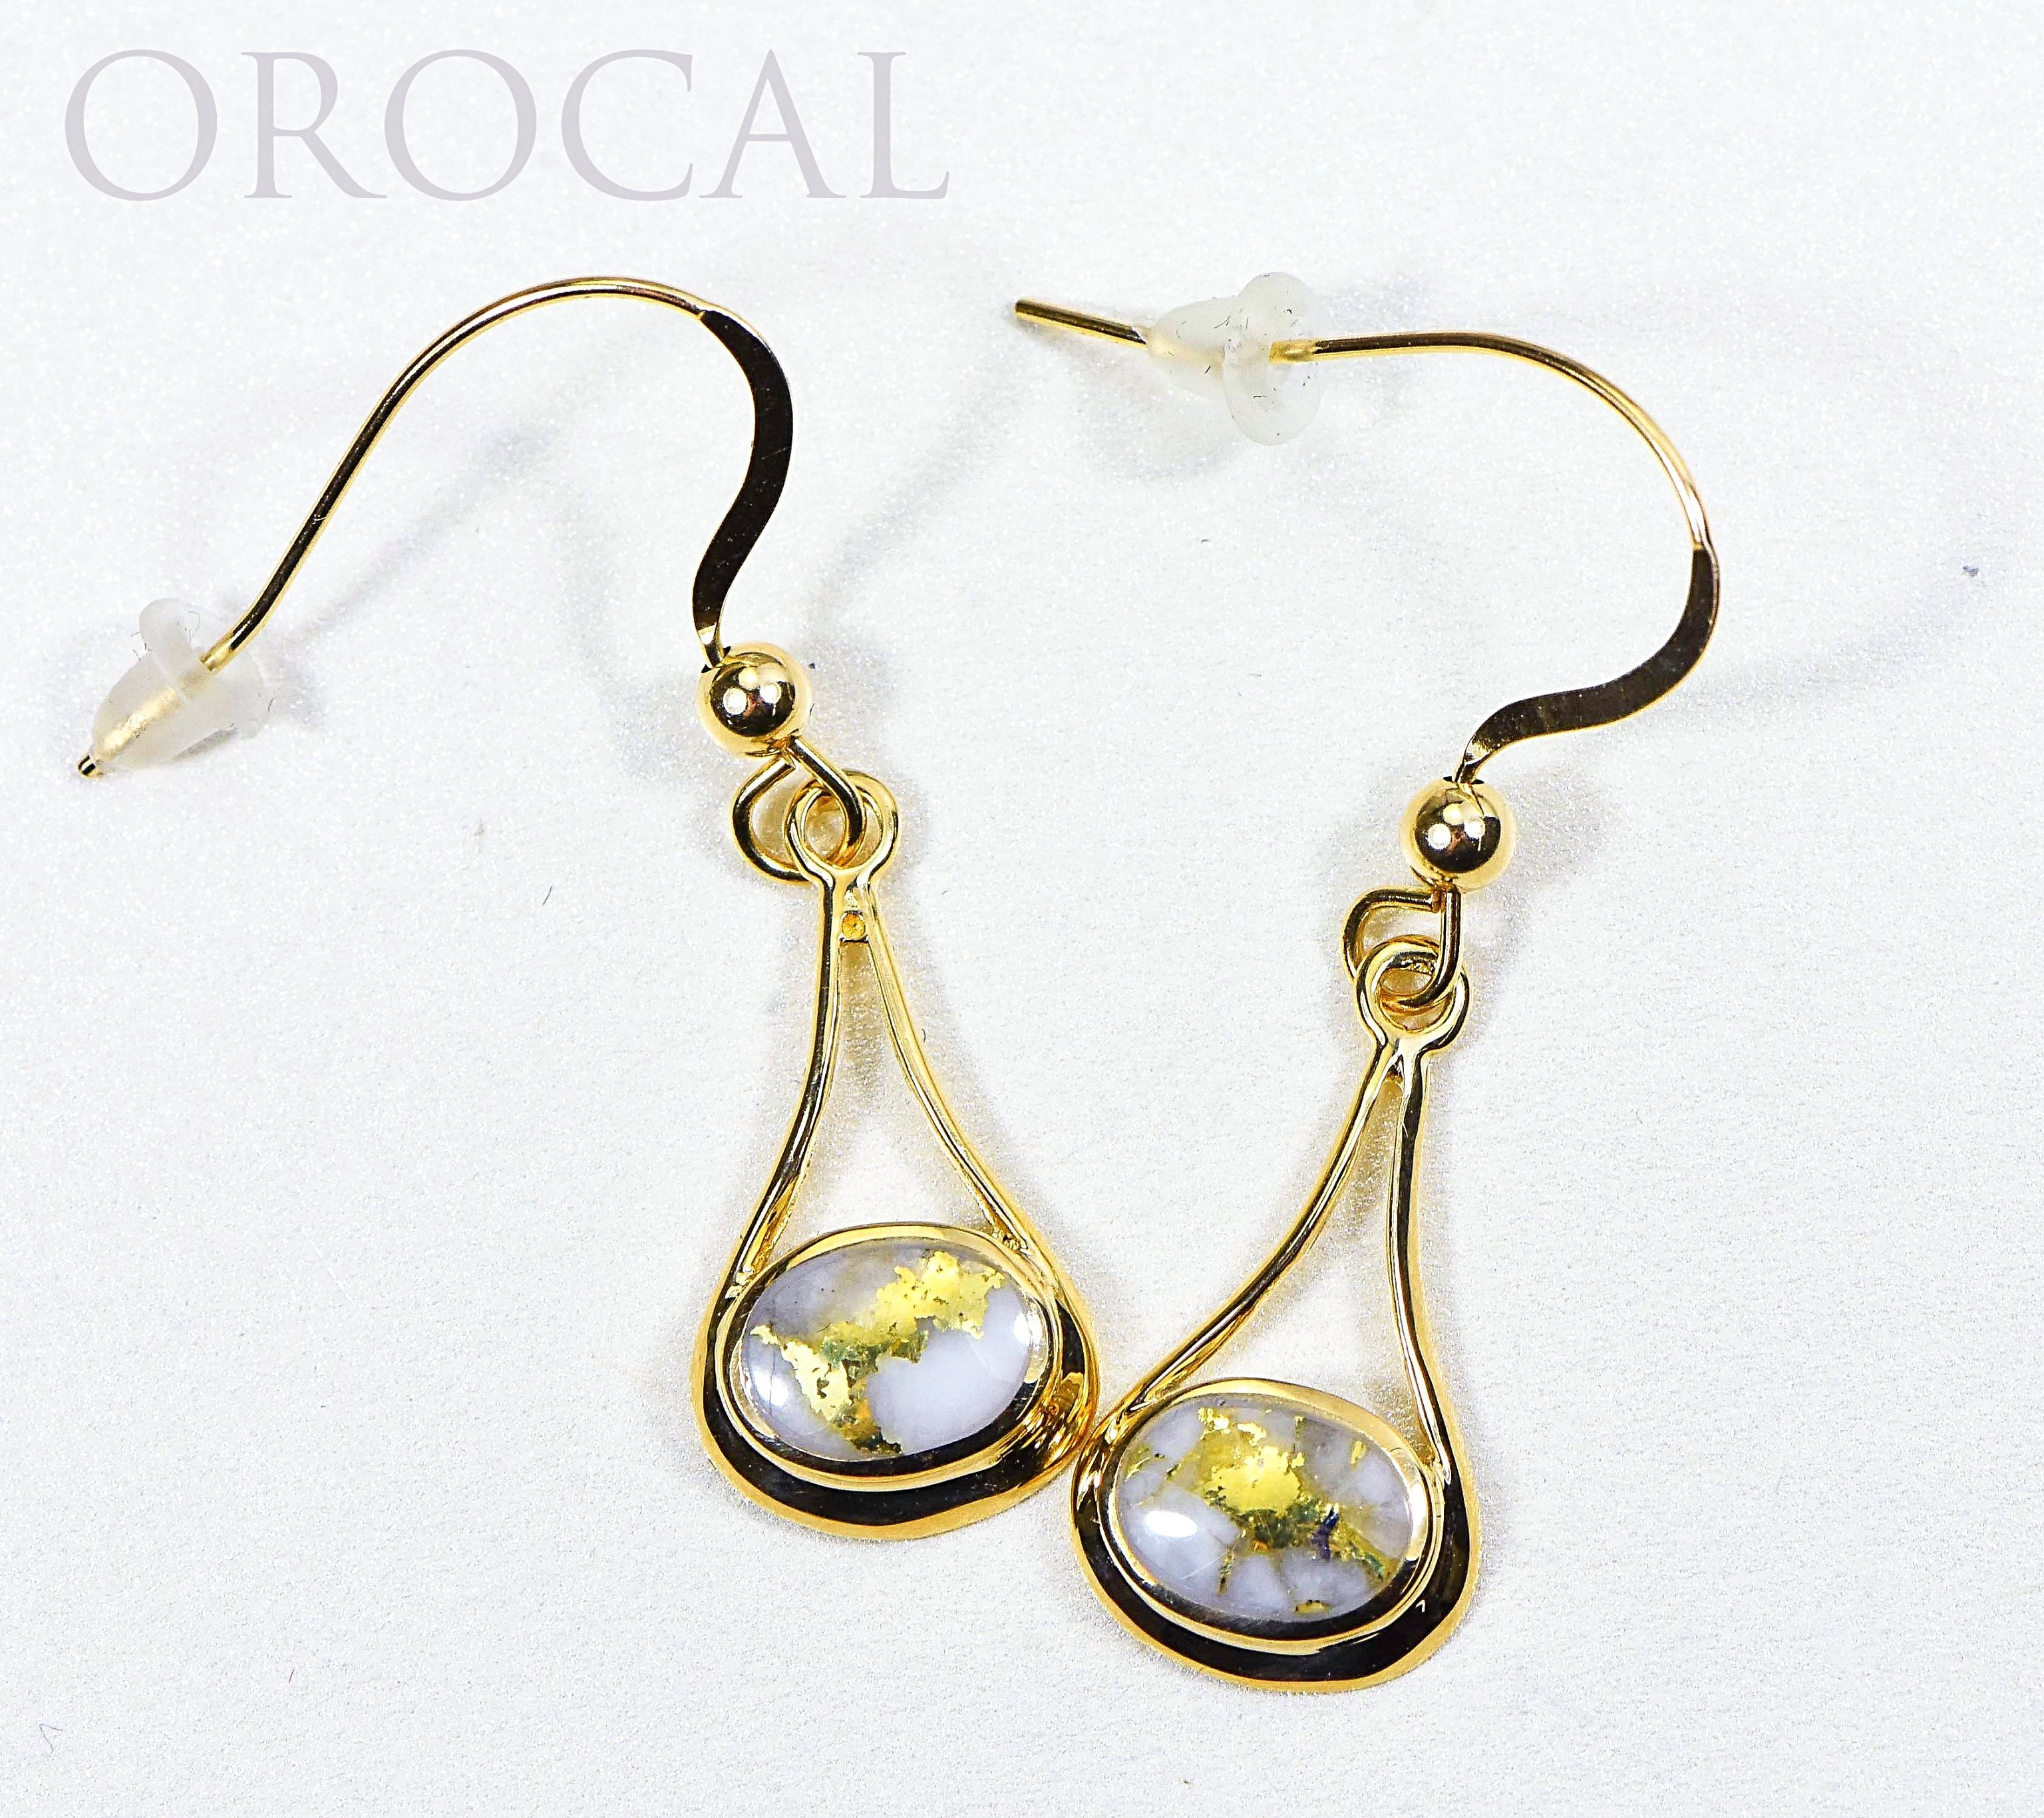 Gold Quartz Earrings "Orocal" EN871Q/WD Genuine Hand Crafted Jewelry - 14K Gold Casting